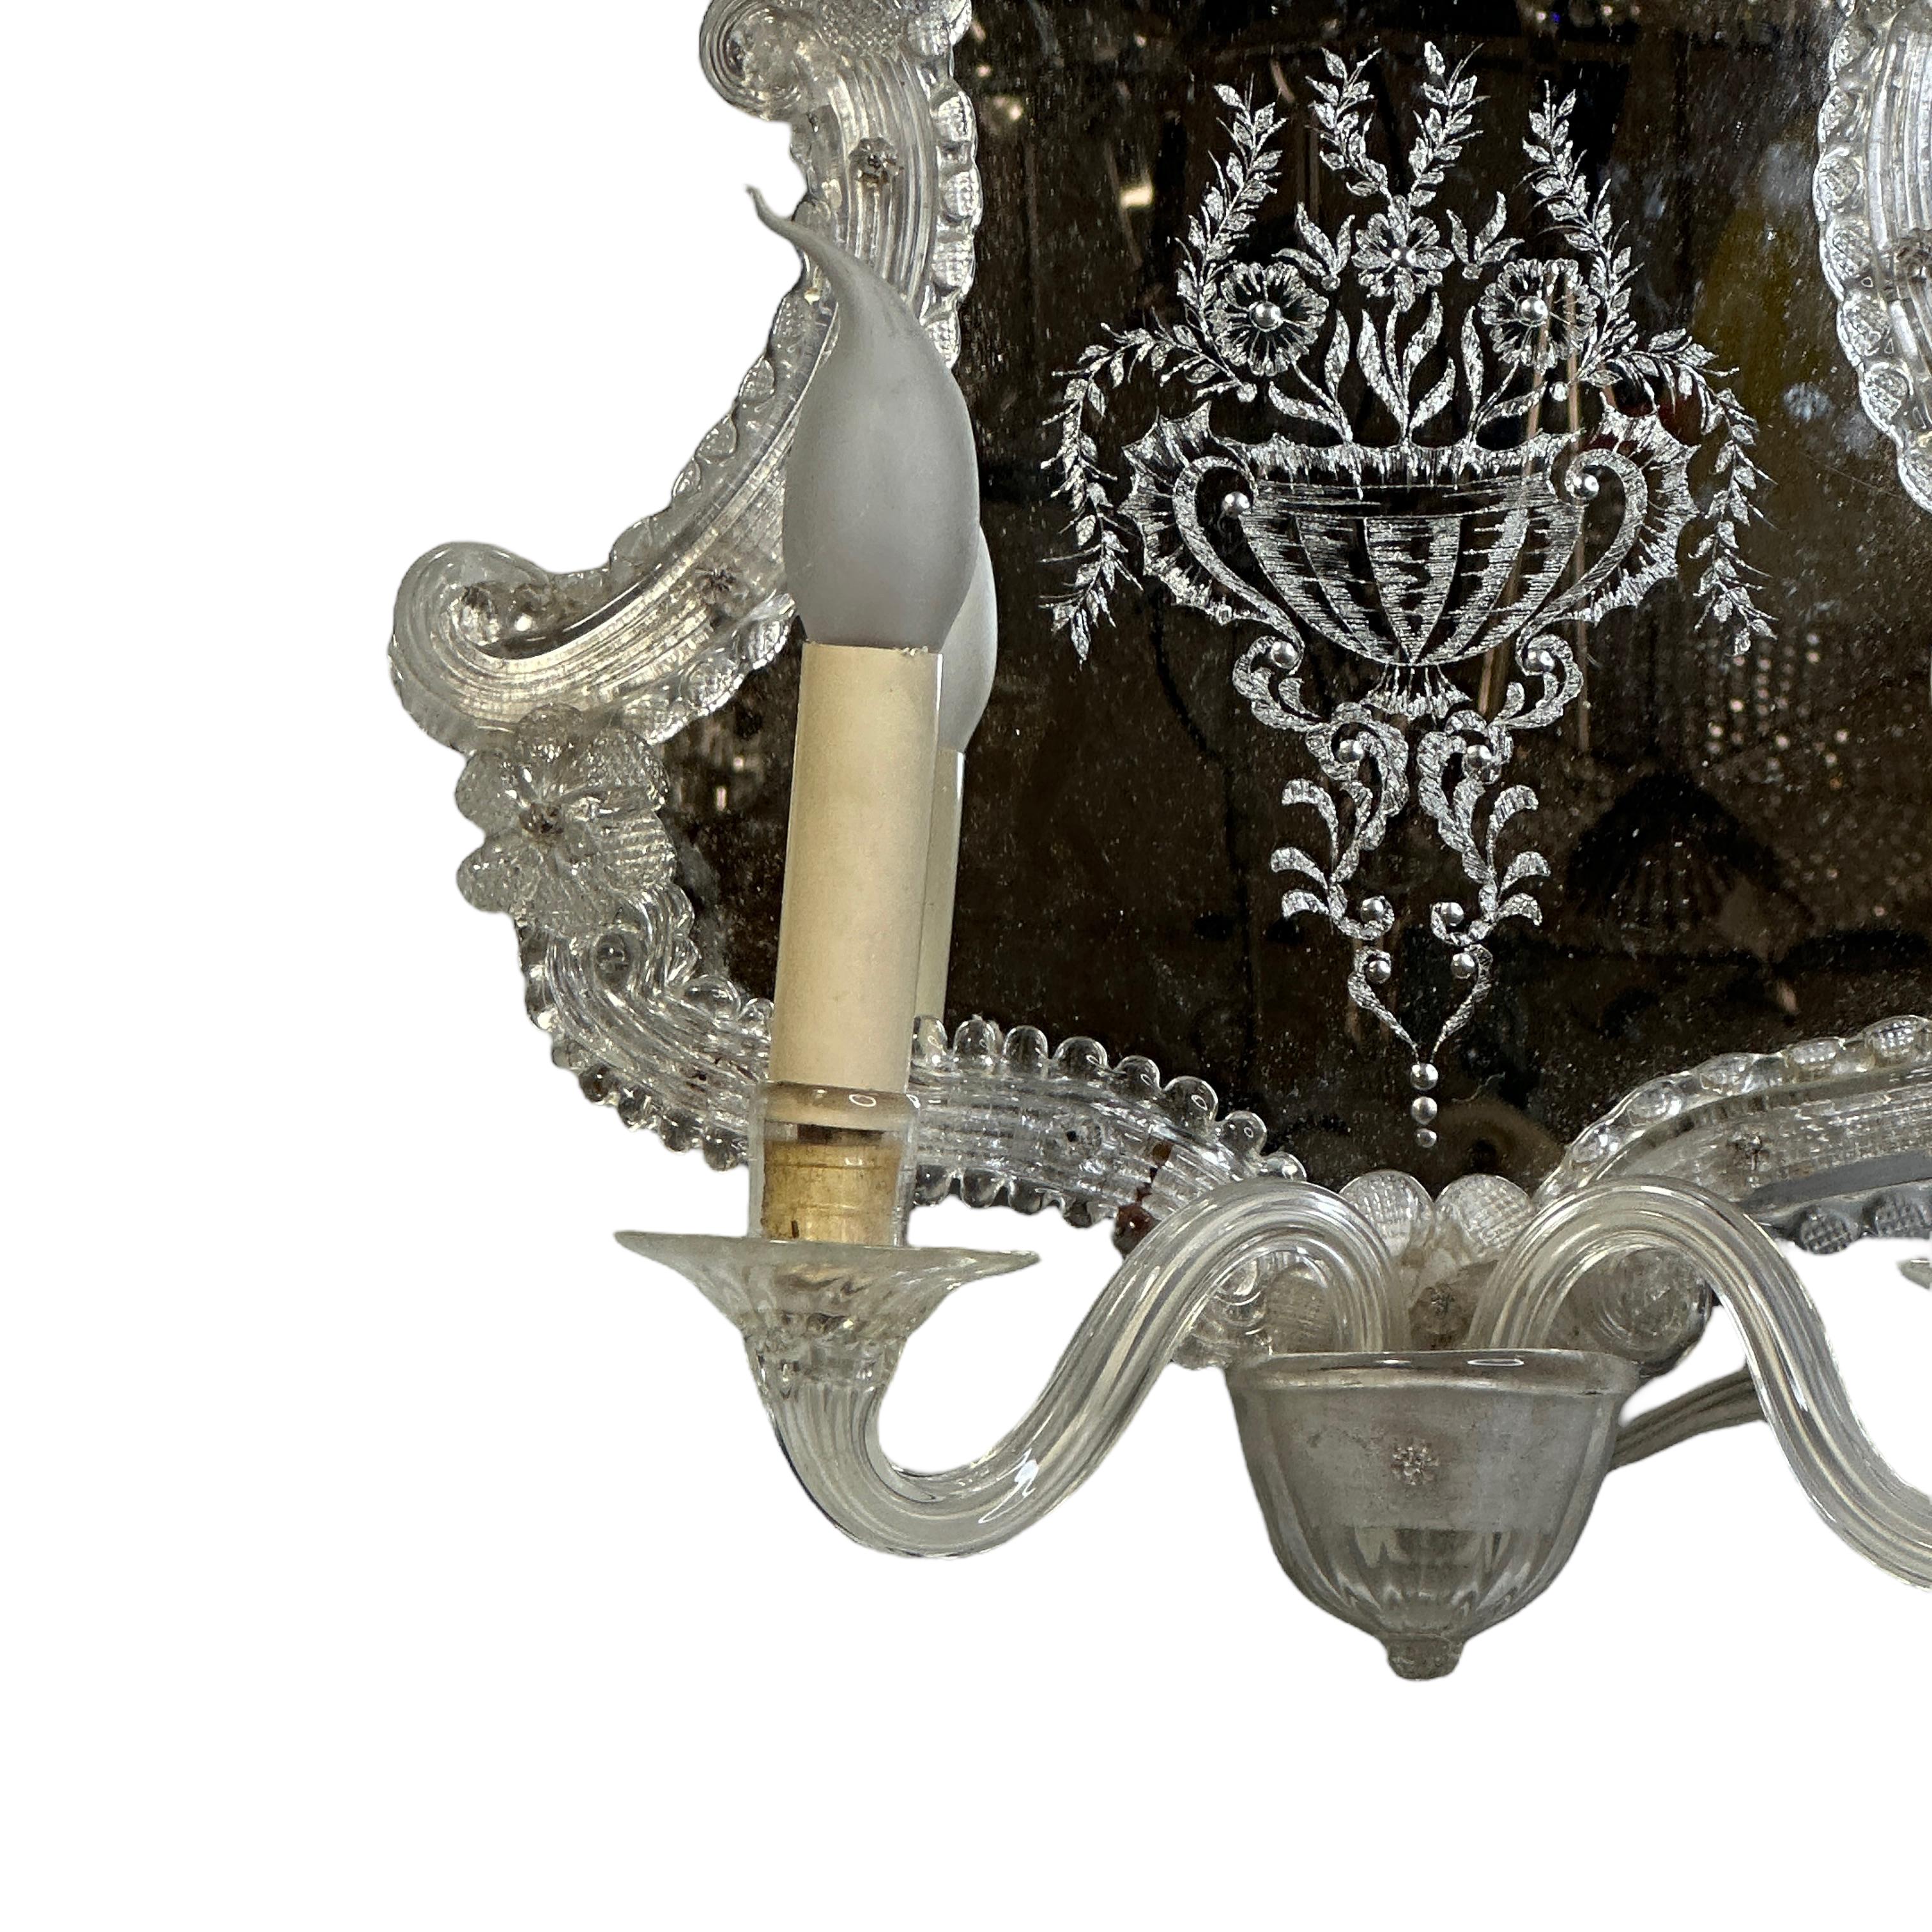 Vintage Italian Hollywood Regency style mirror wall sconce hand blown in clear Murano glass with decorative details, antiqued patina on mirror, mounted on wood back frame. The fixture requires two European E14 / 110 Volt candelabra bulbs, each bulb